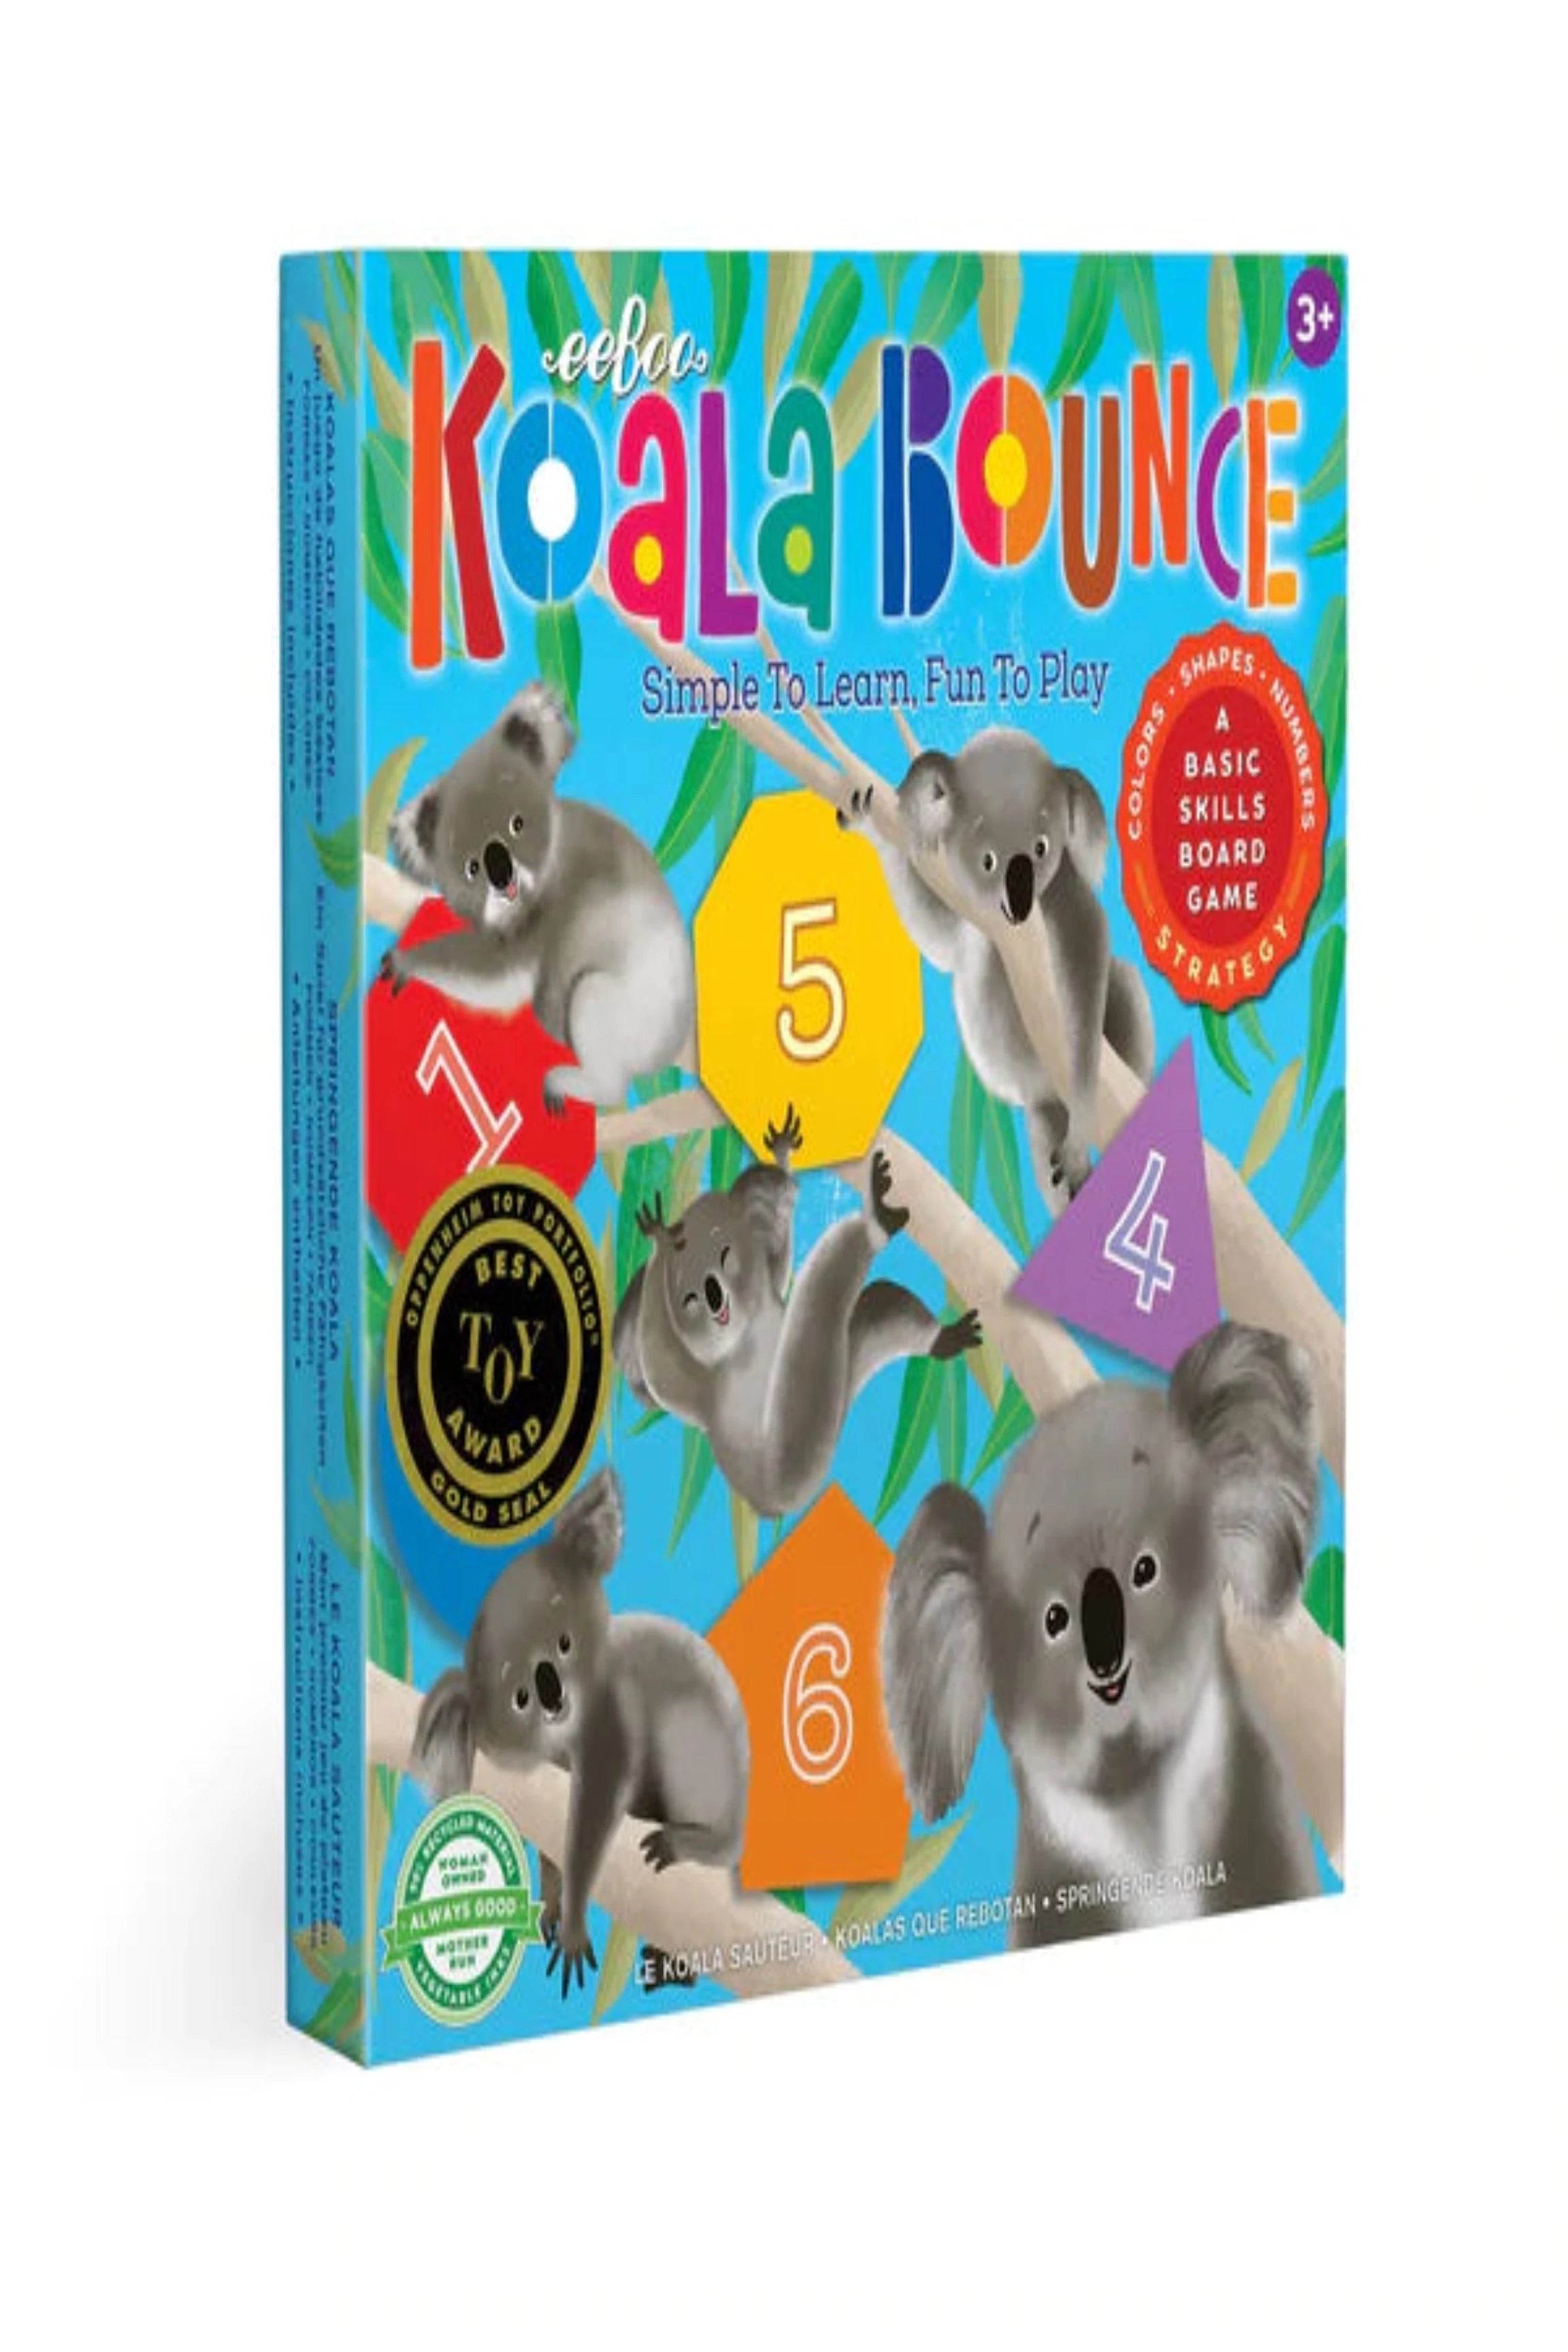 Colorful Koala - Paint By Number - Paint by Numbers for Sale